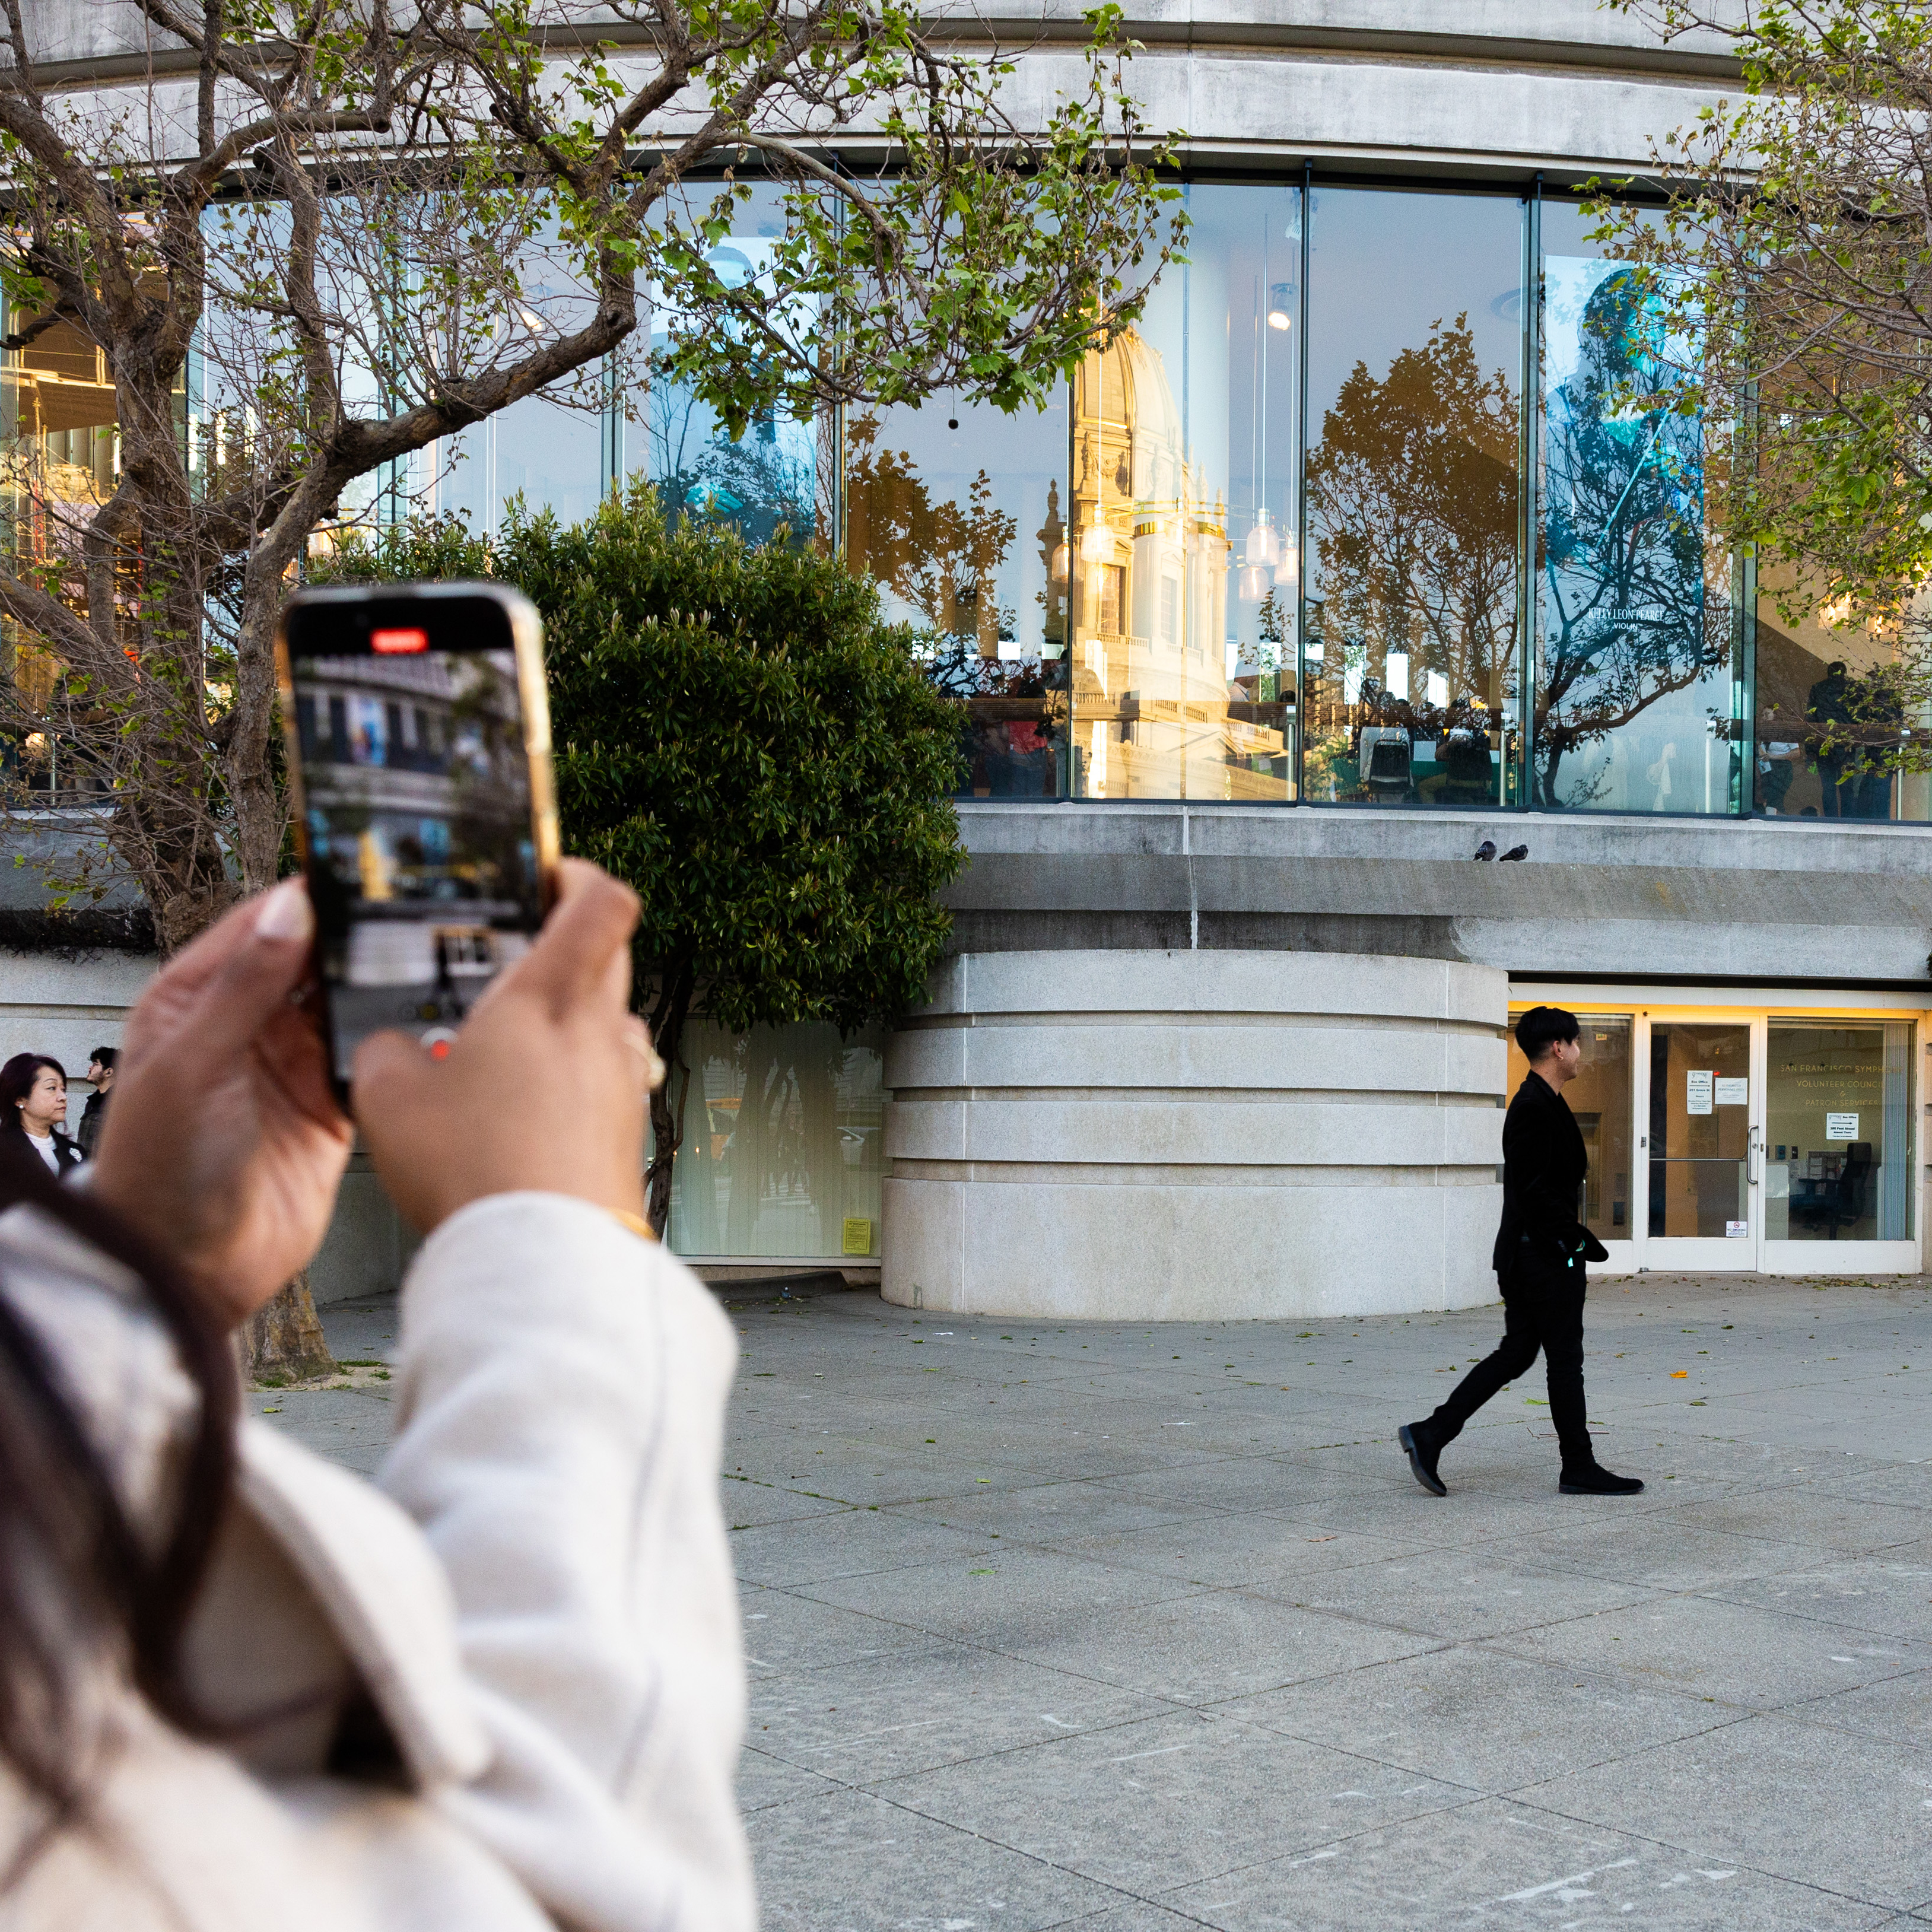 A person is taking a photo with their phone capturing another person walking by a building with reflective windows.